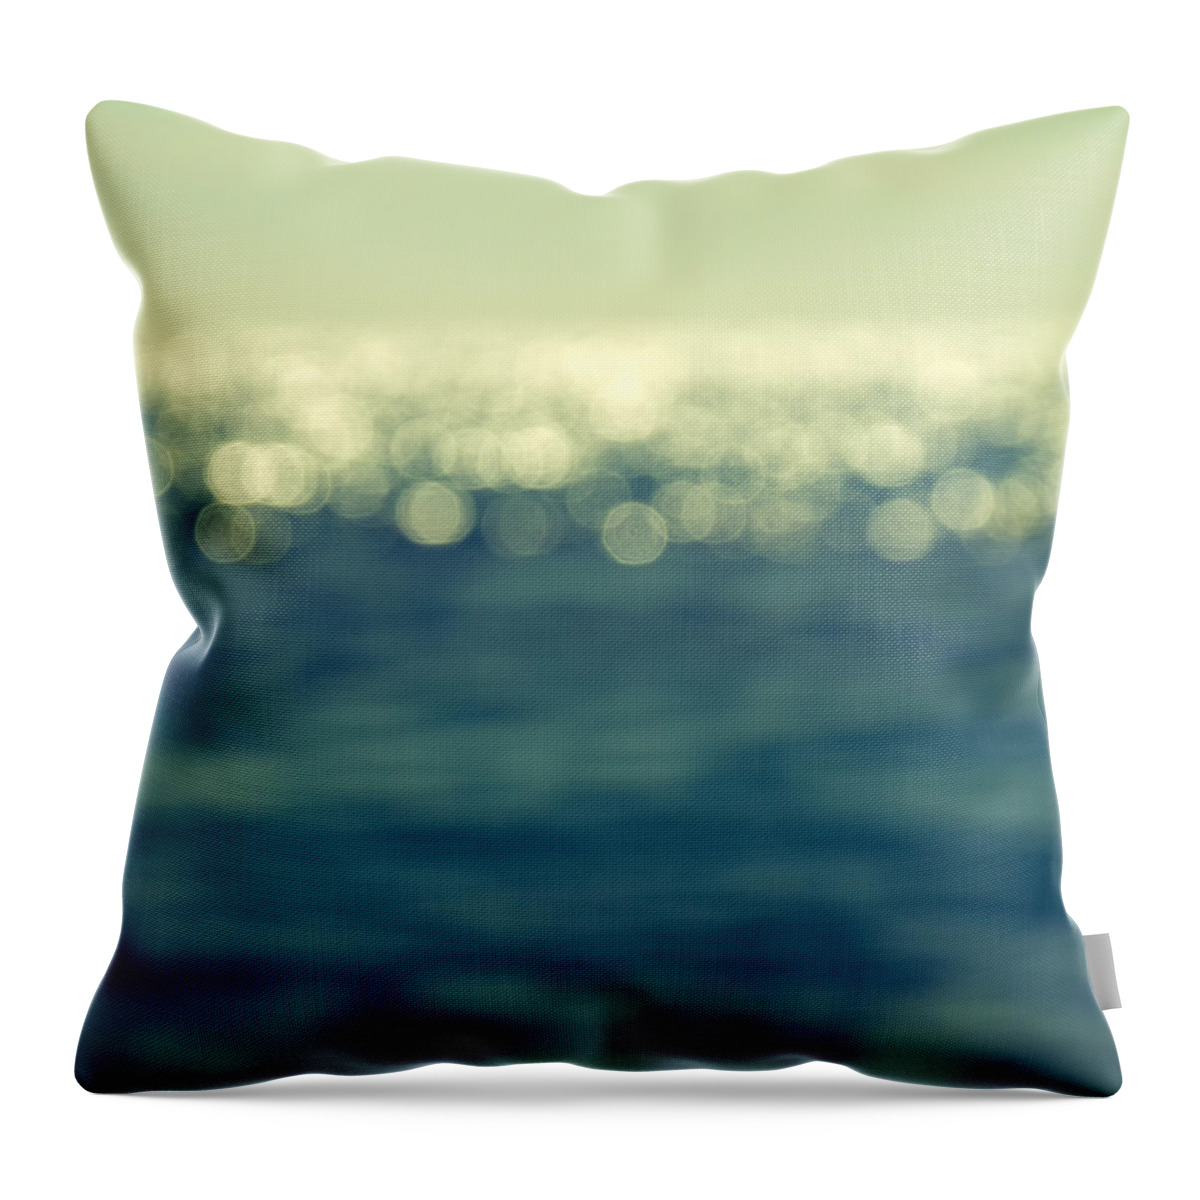 Abstract Throw Pillow featuring the photograph Blurred Light by Stelios Kleanthous